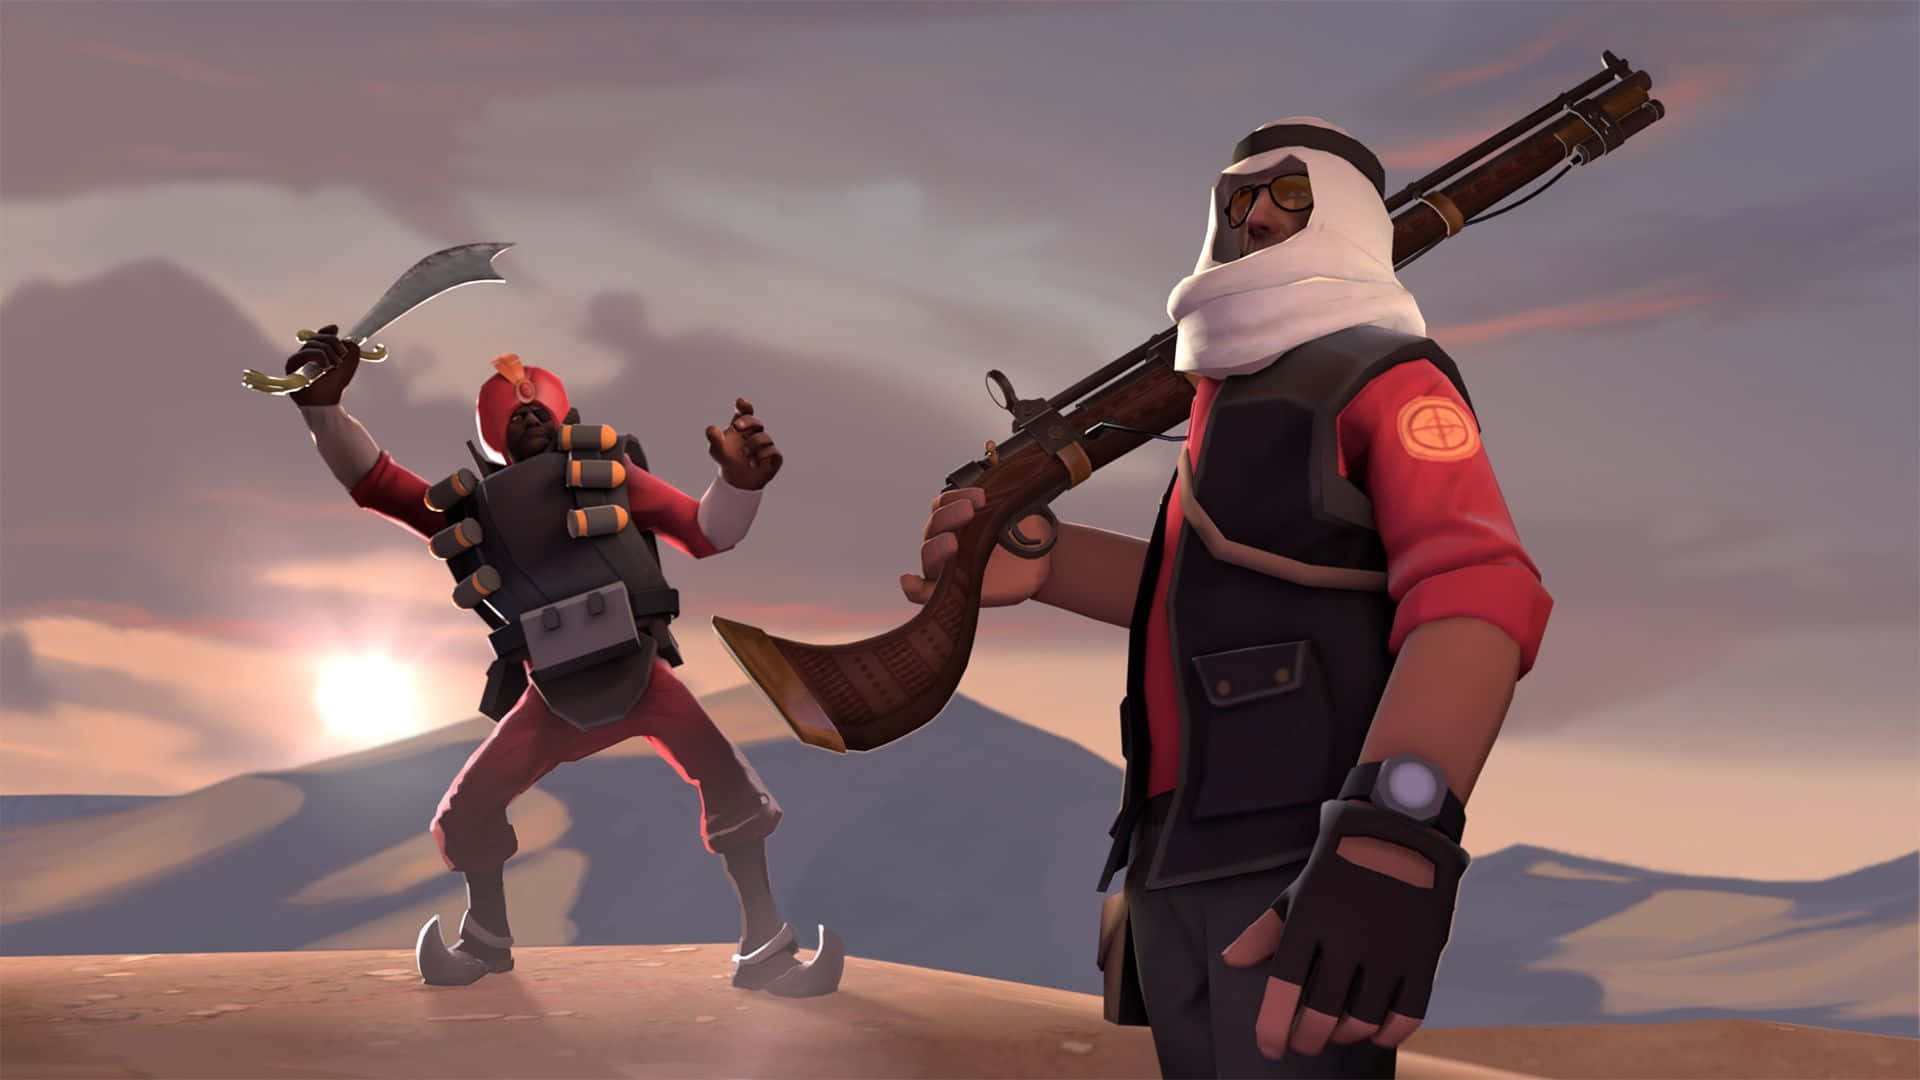 Team Fortress 2 Characters in Action Wallpaper